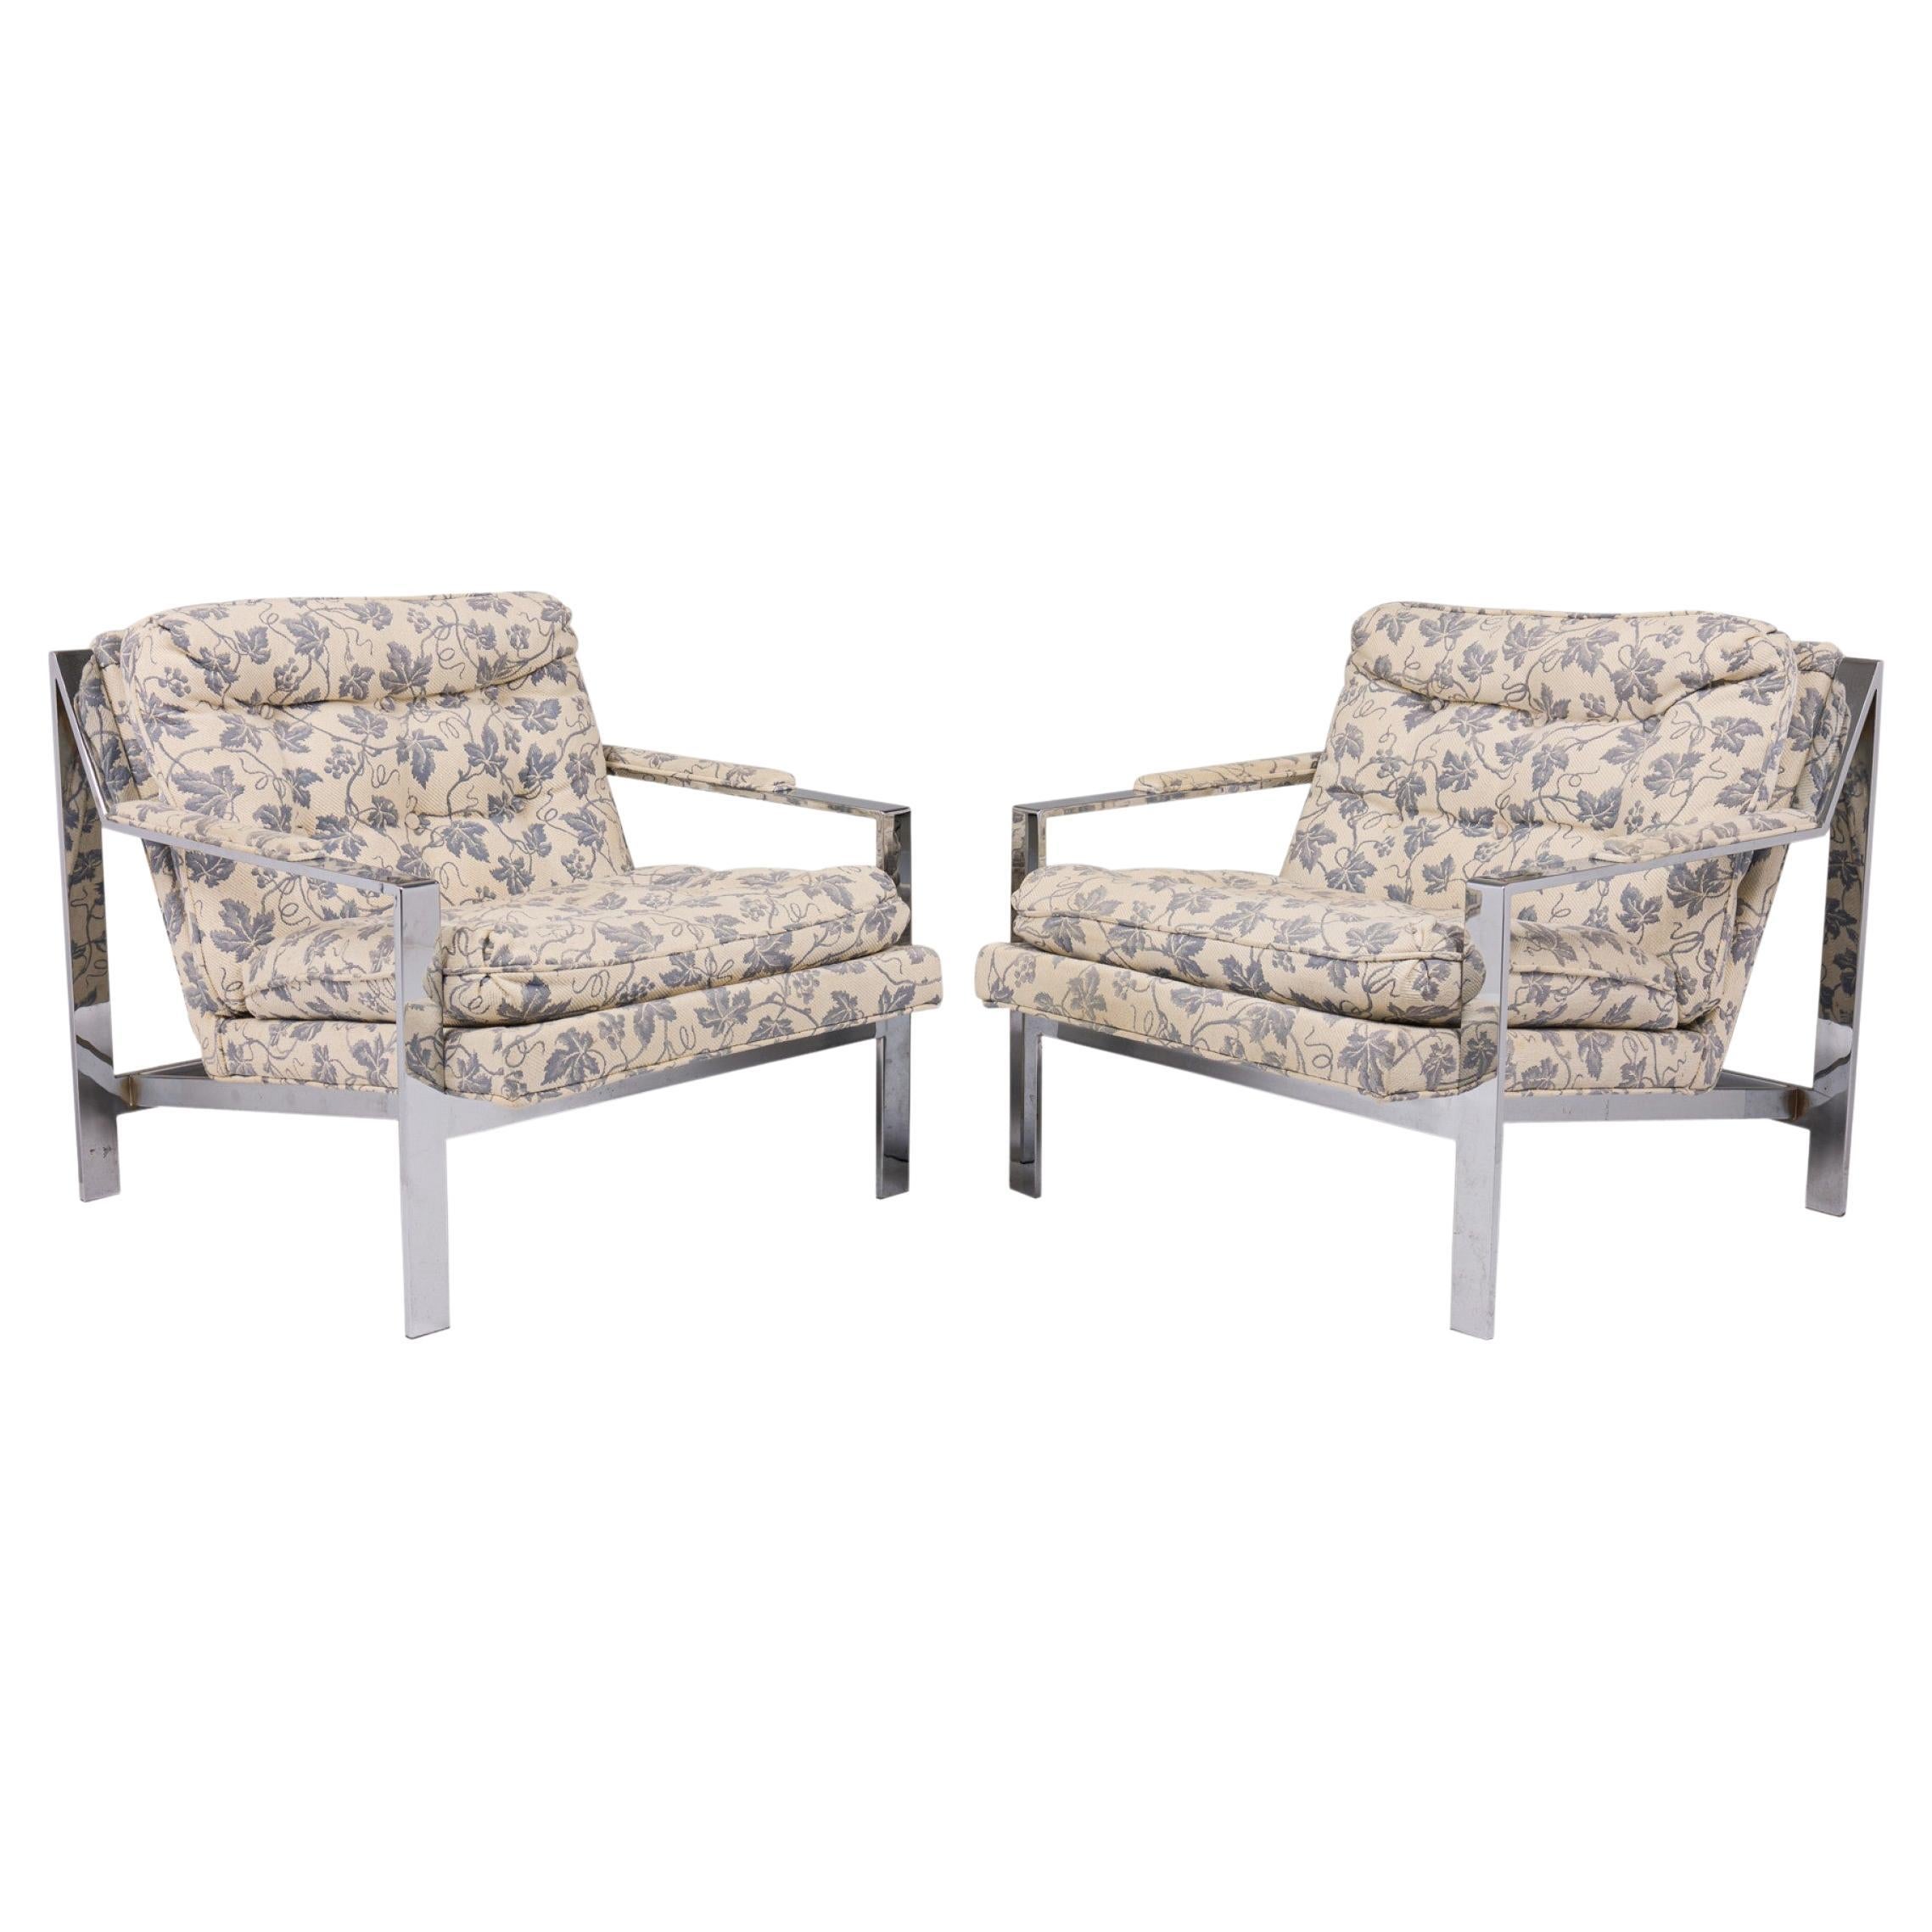 Pair of Milo Baughman for Thayer Coggin Chrome and Floral Armchairs 